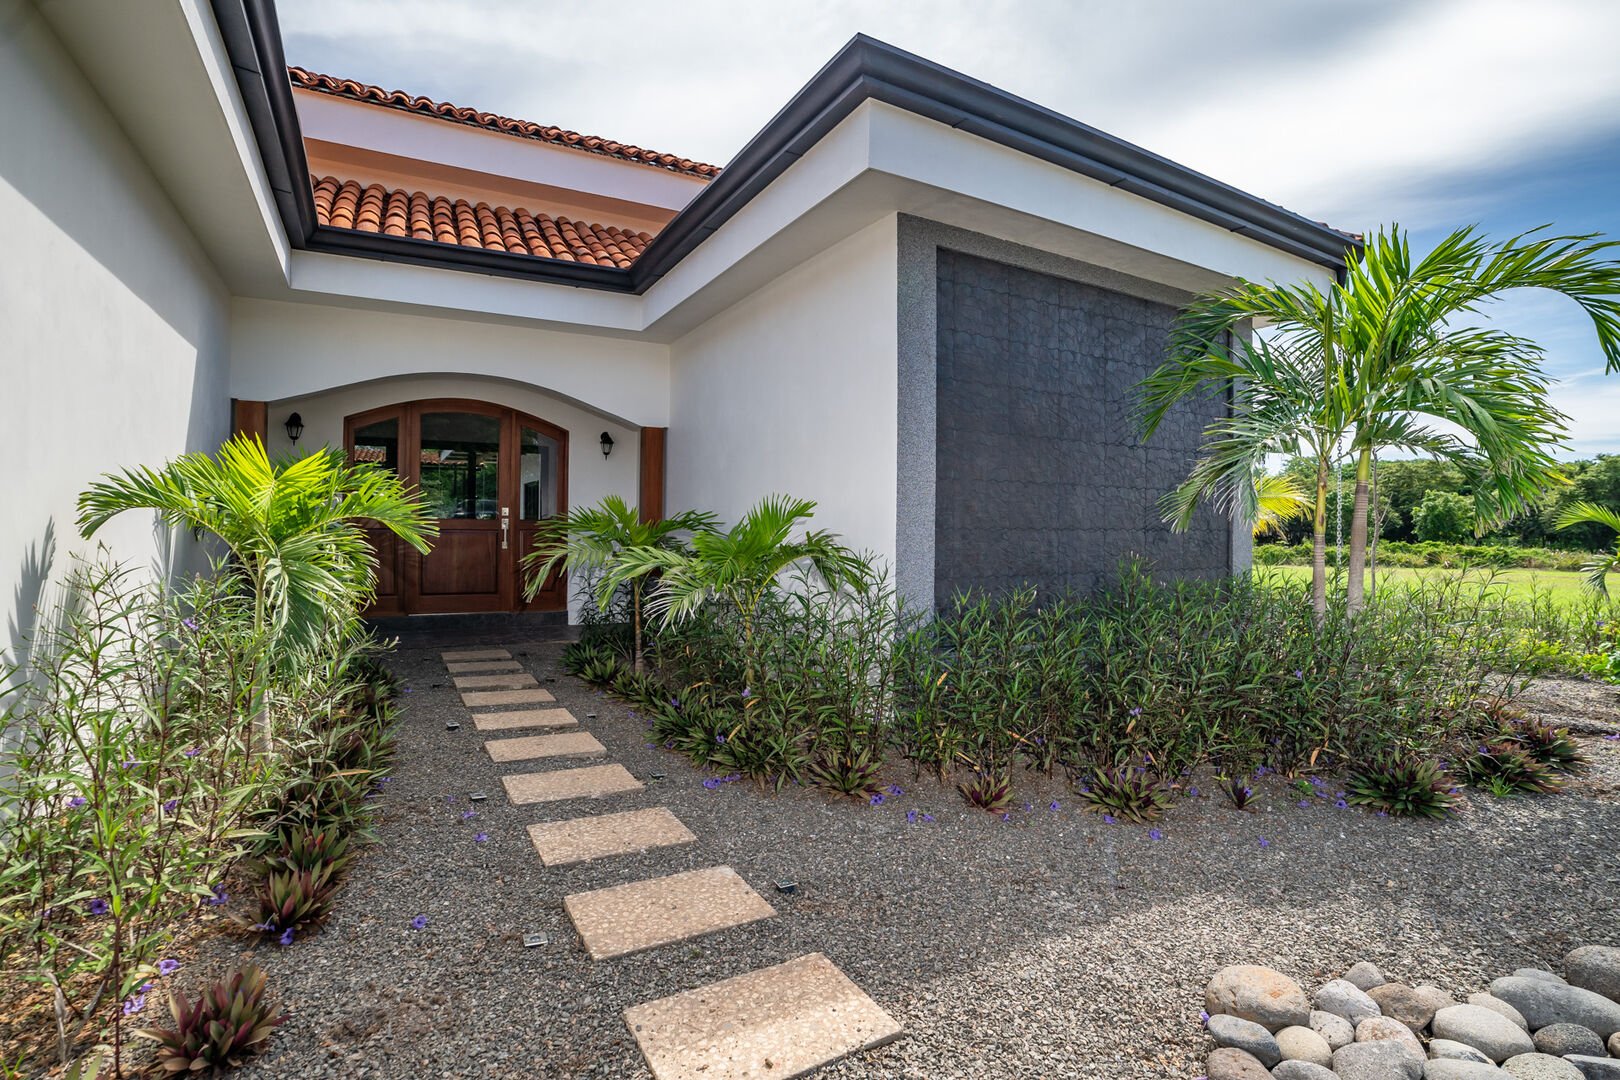 Brand new vacation rental home in Guanacaste's most exclusive gated community.